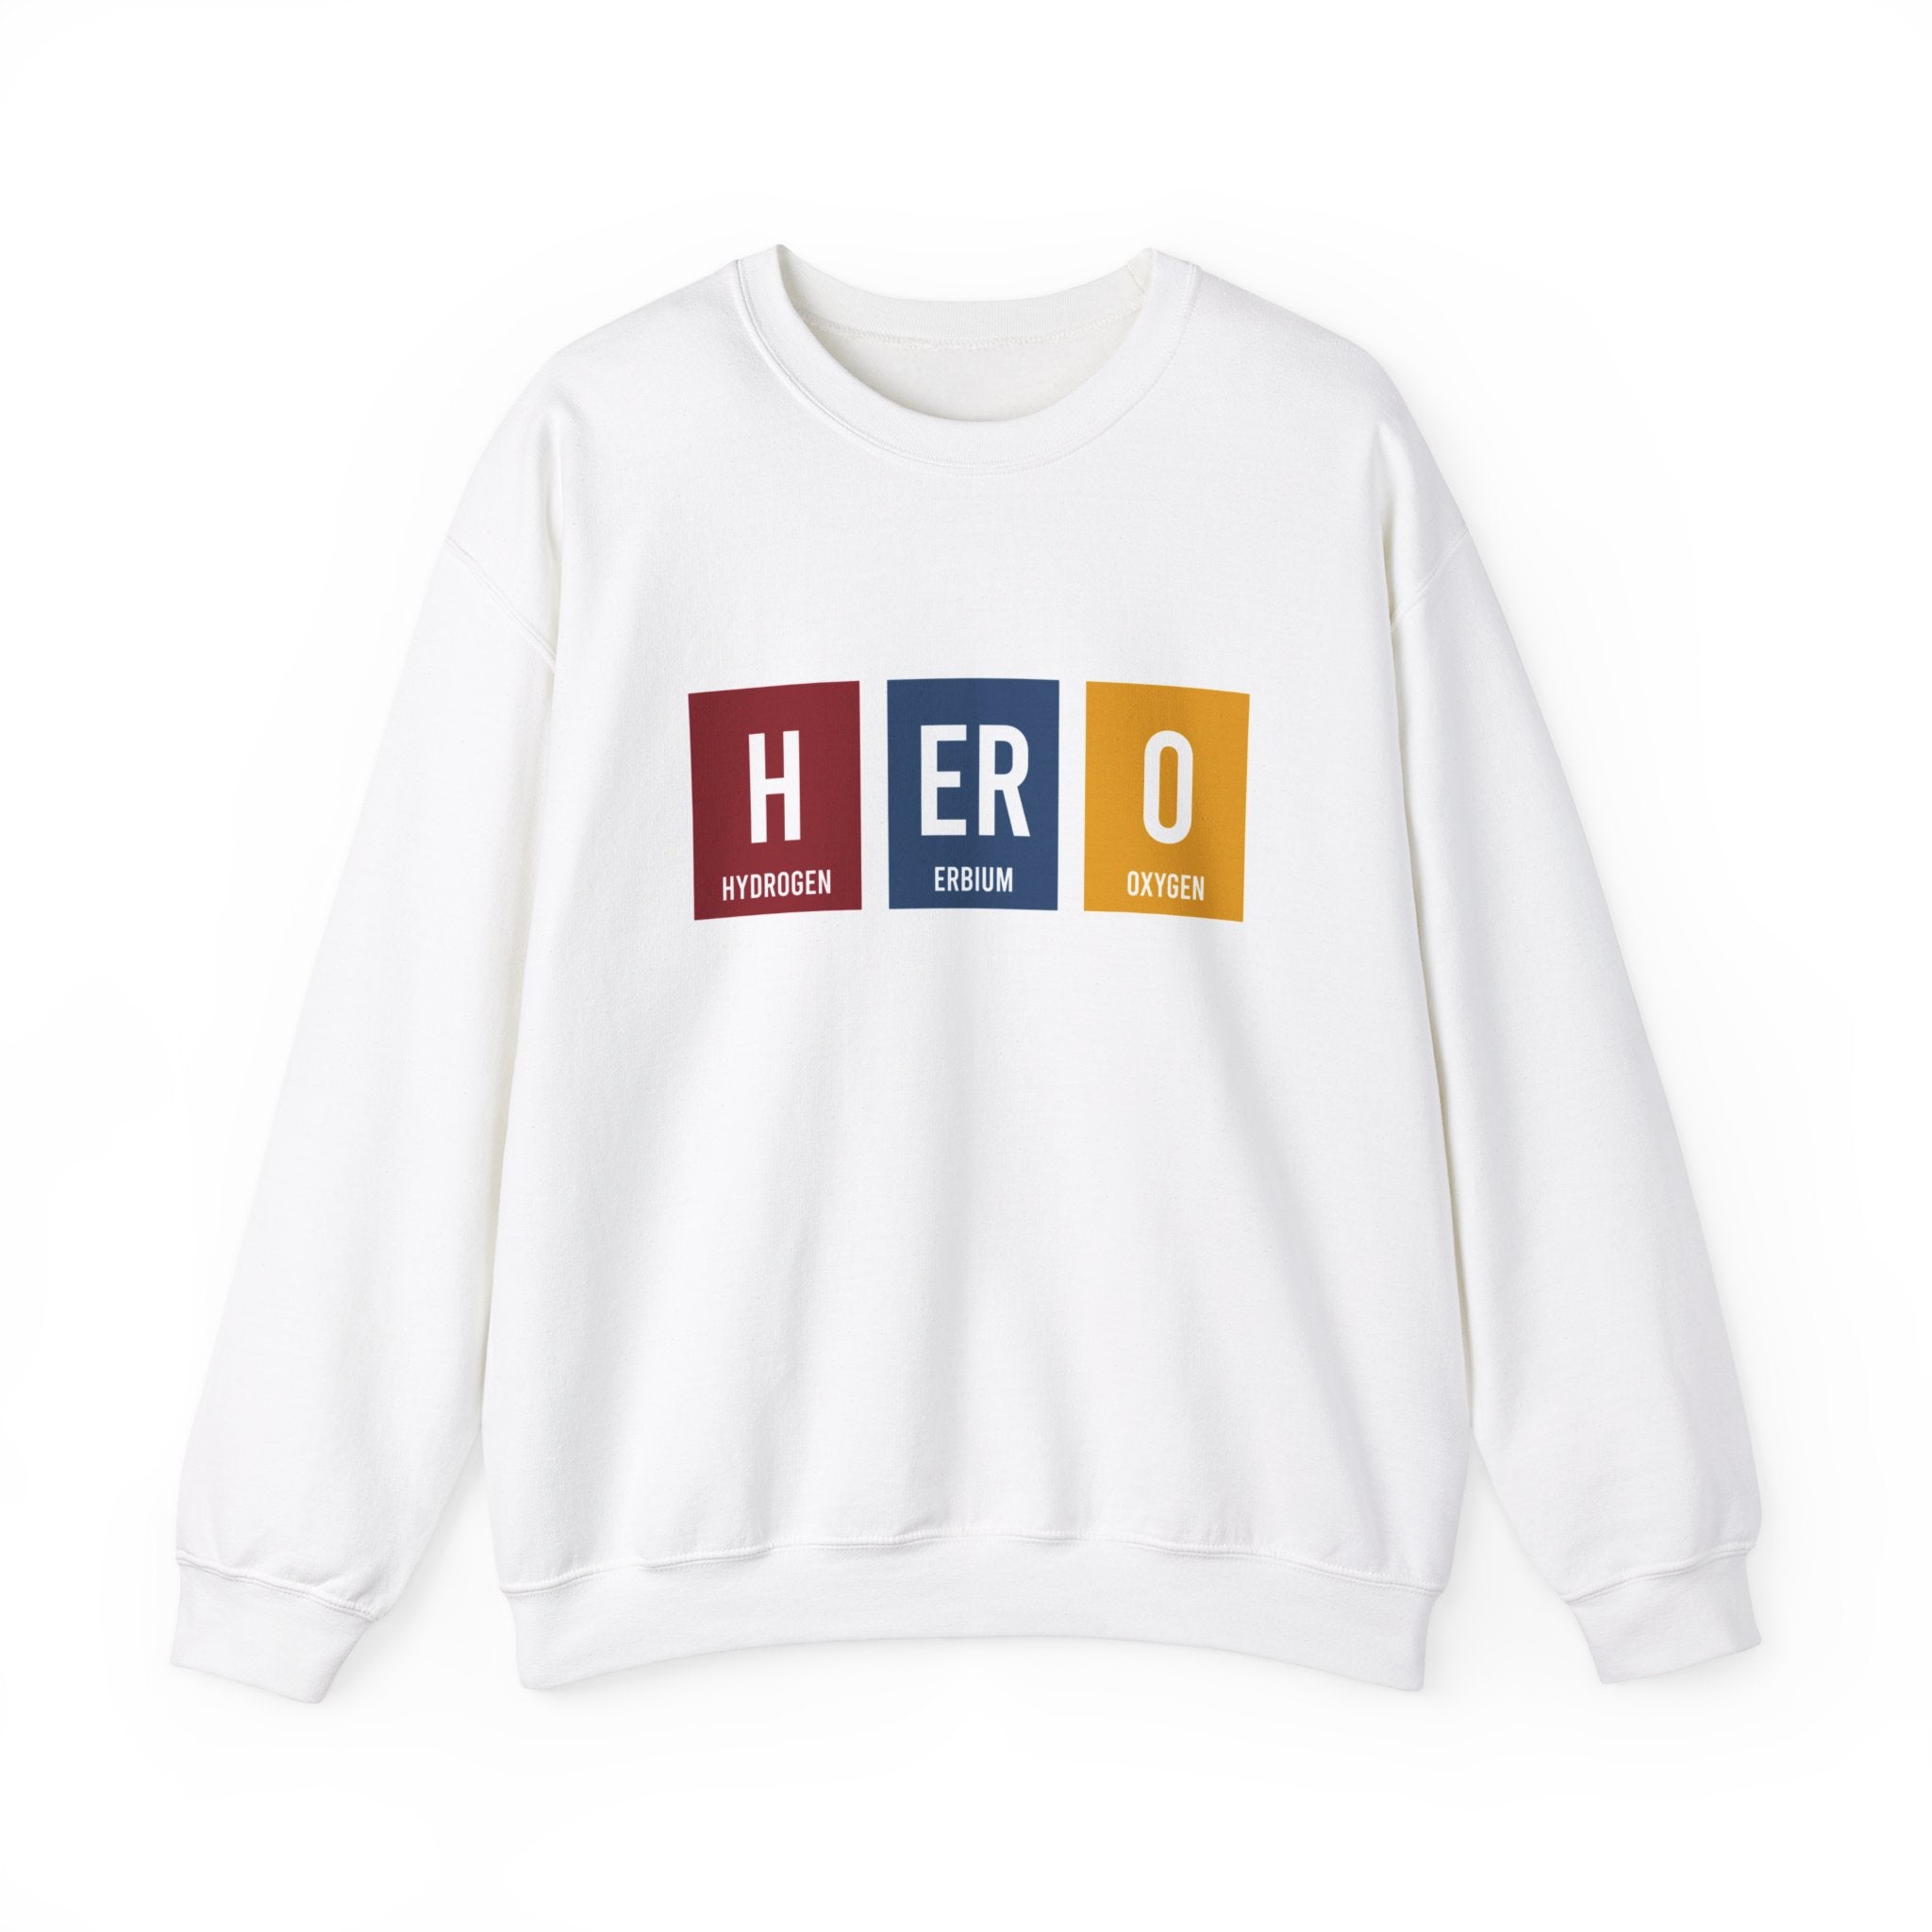 HERO - Sweatshirt with the word "HERO" displayed in a periodic table style. "H" is for Hydrogen, "Er" is for Erbium, and "O" is for Oxygen. Perfect blend of comfort and style to keep you warm this winter.